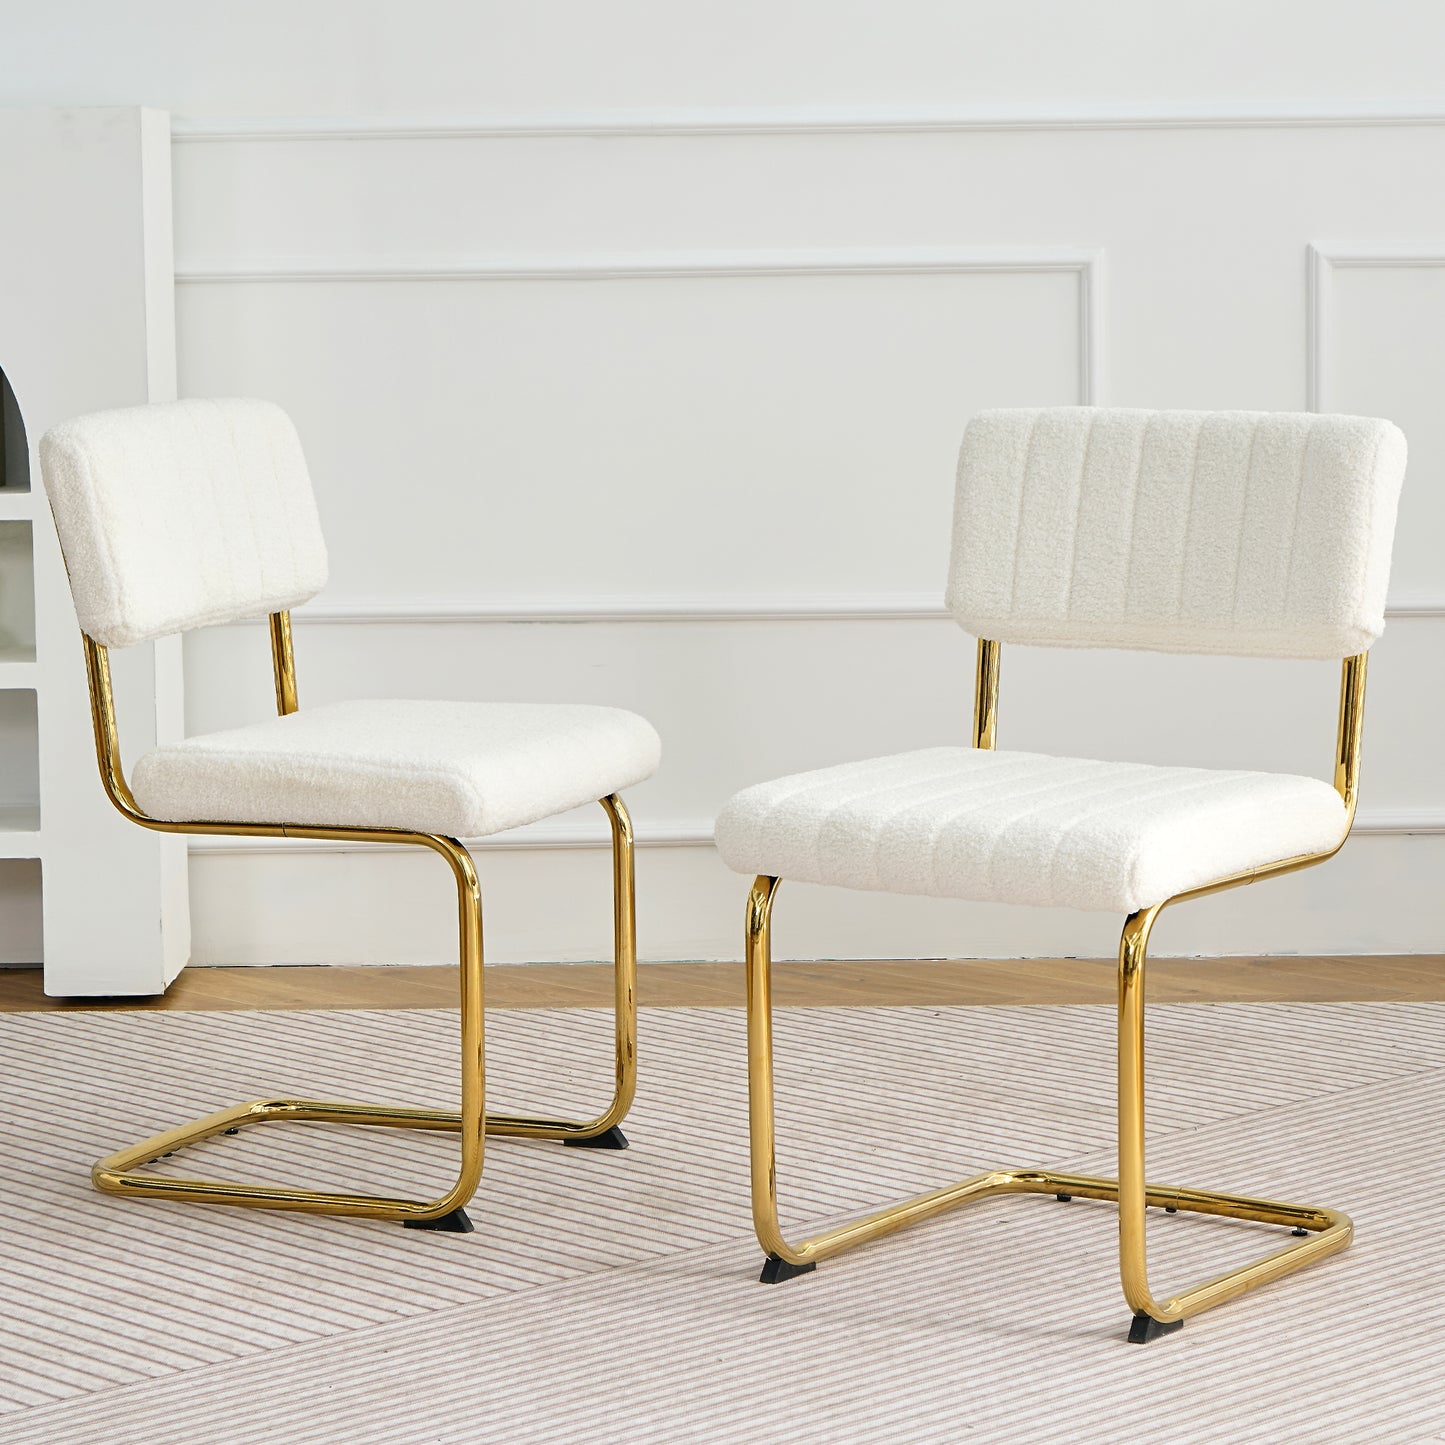 Modern Luxury Dining Chairs (set of 2)